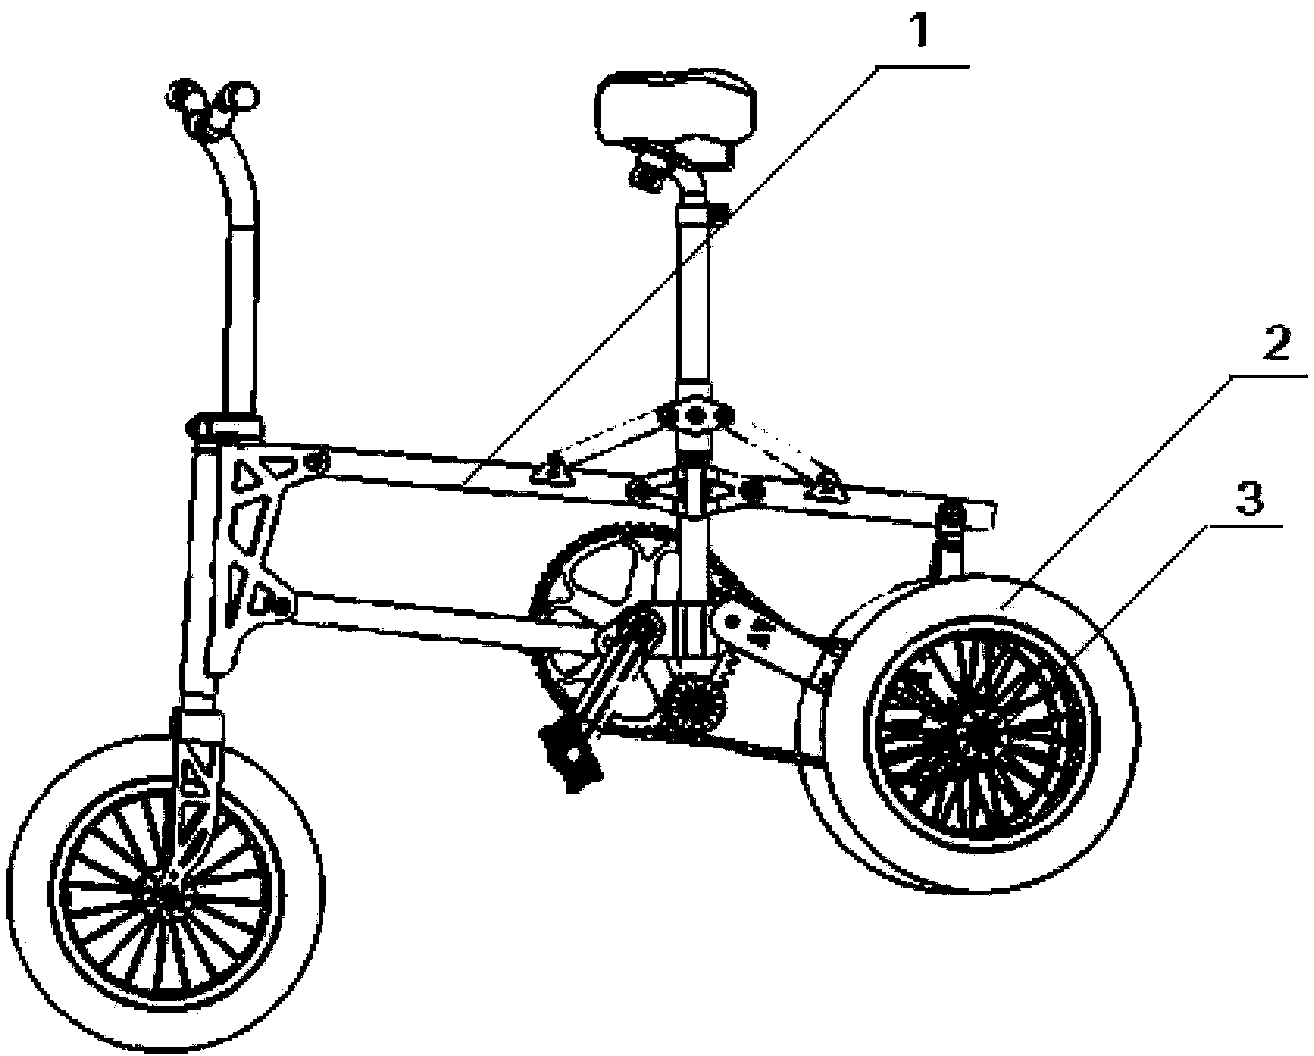 Bicycle with adjustable side wheels